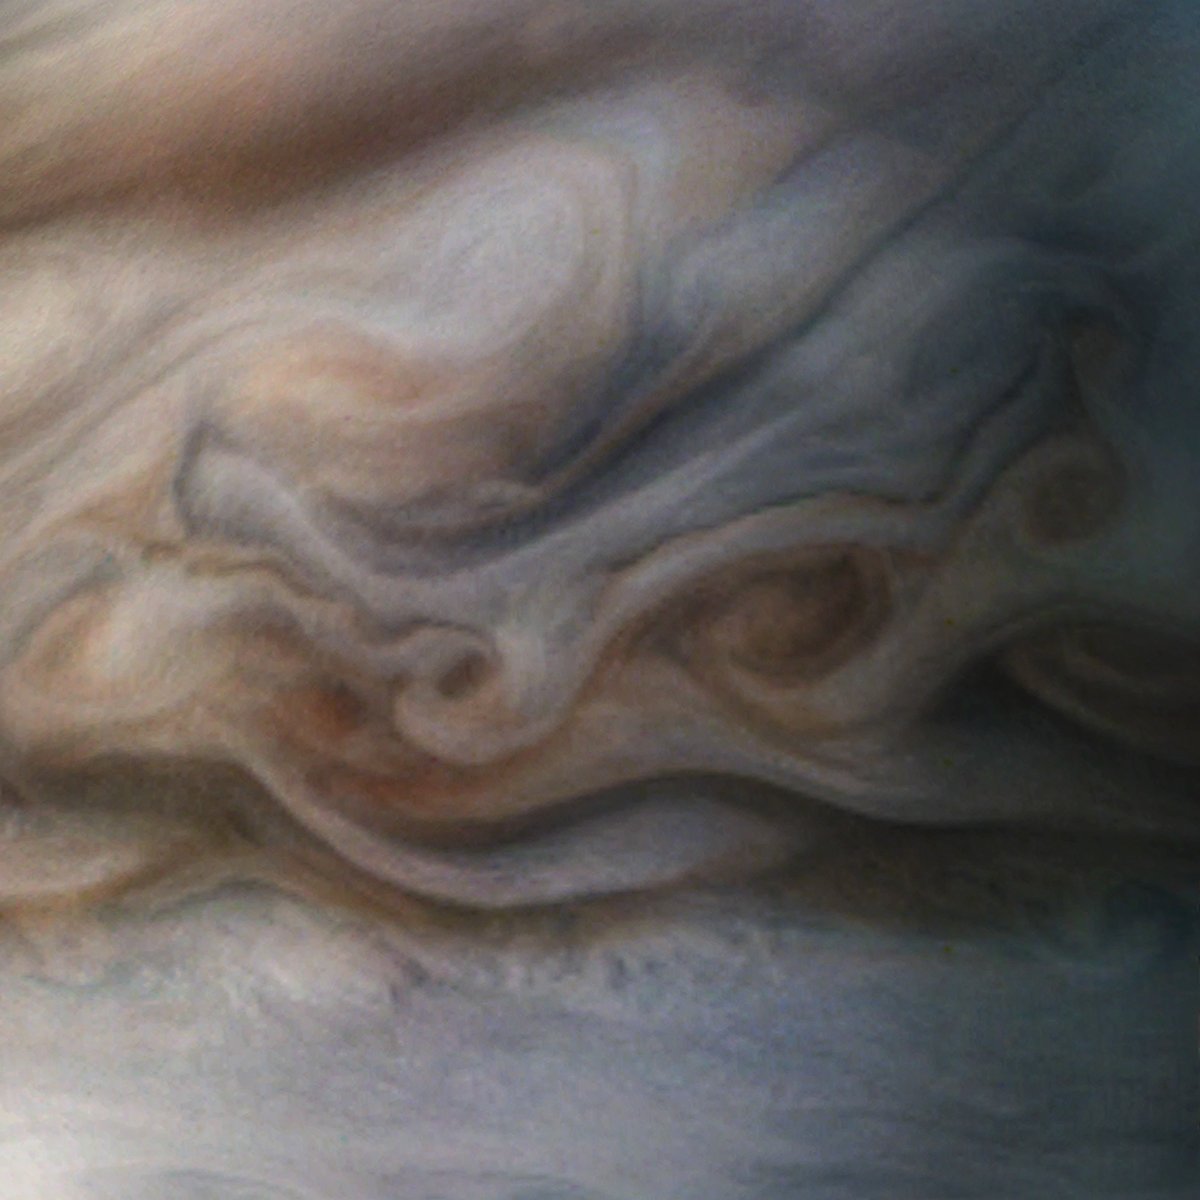 And here's a close-up of Jupiter's swirling cloud tops.